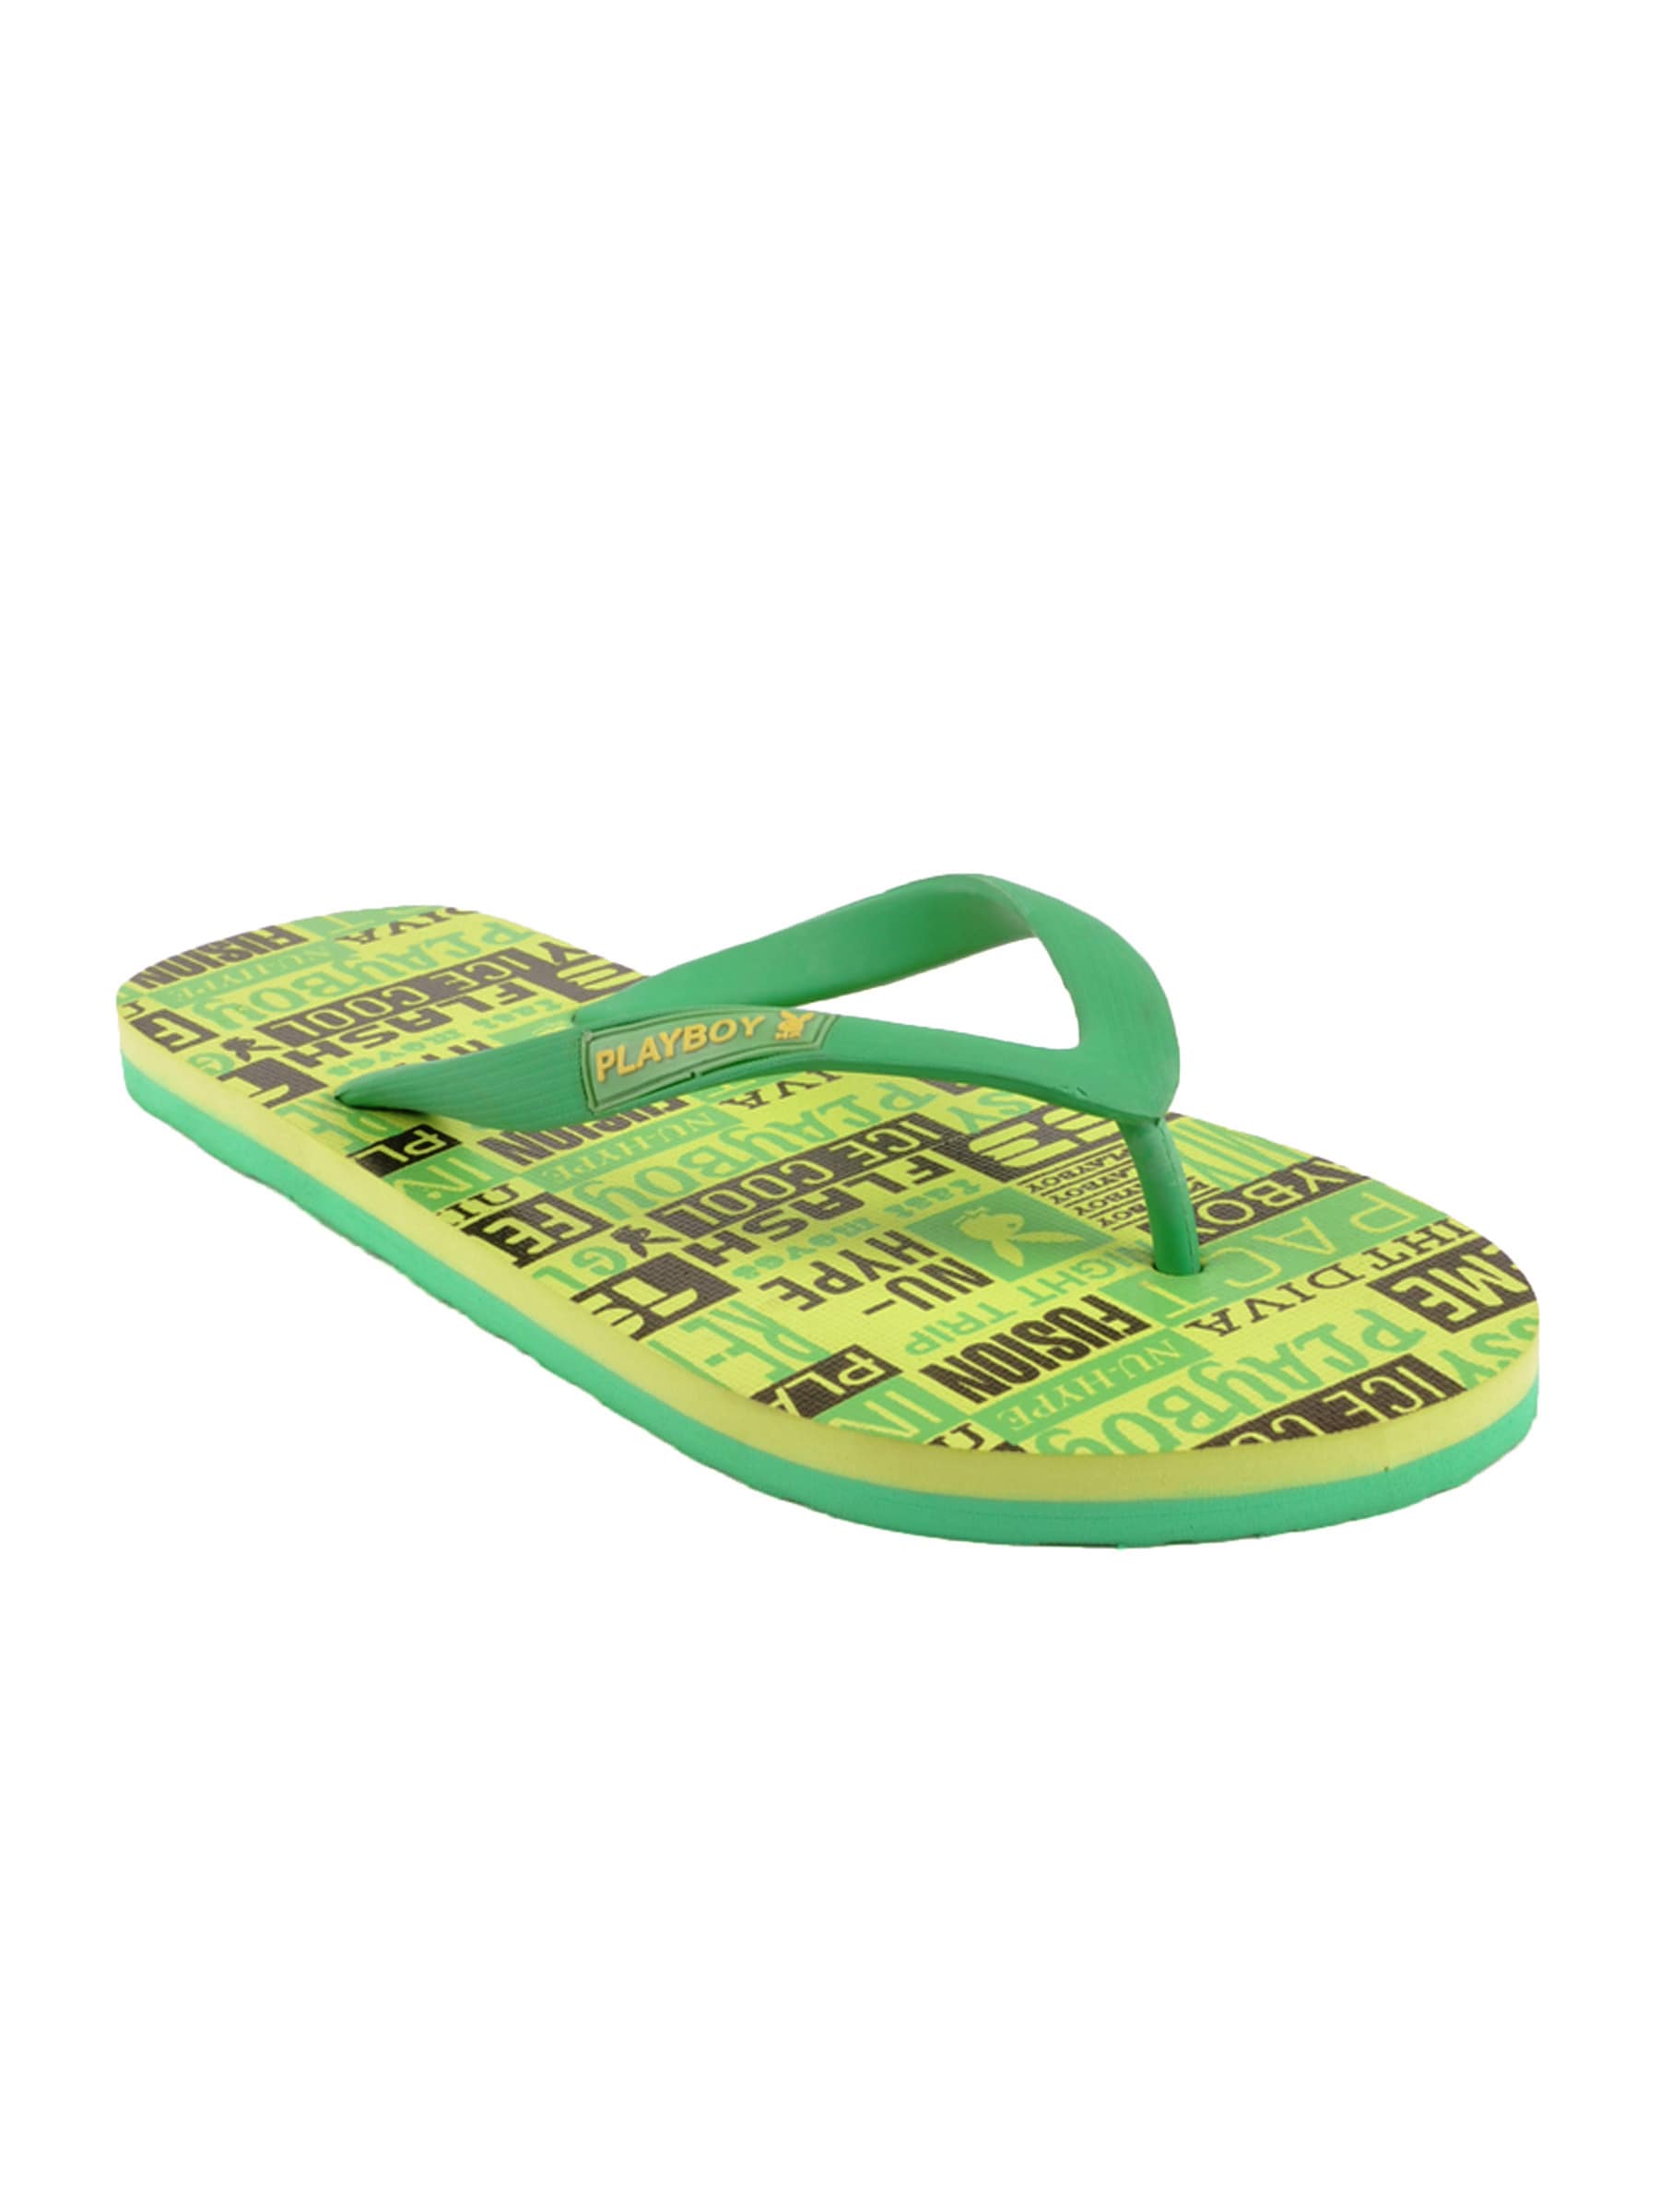 Playboy Men Casual Green Slippers